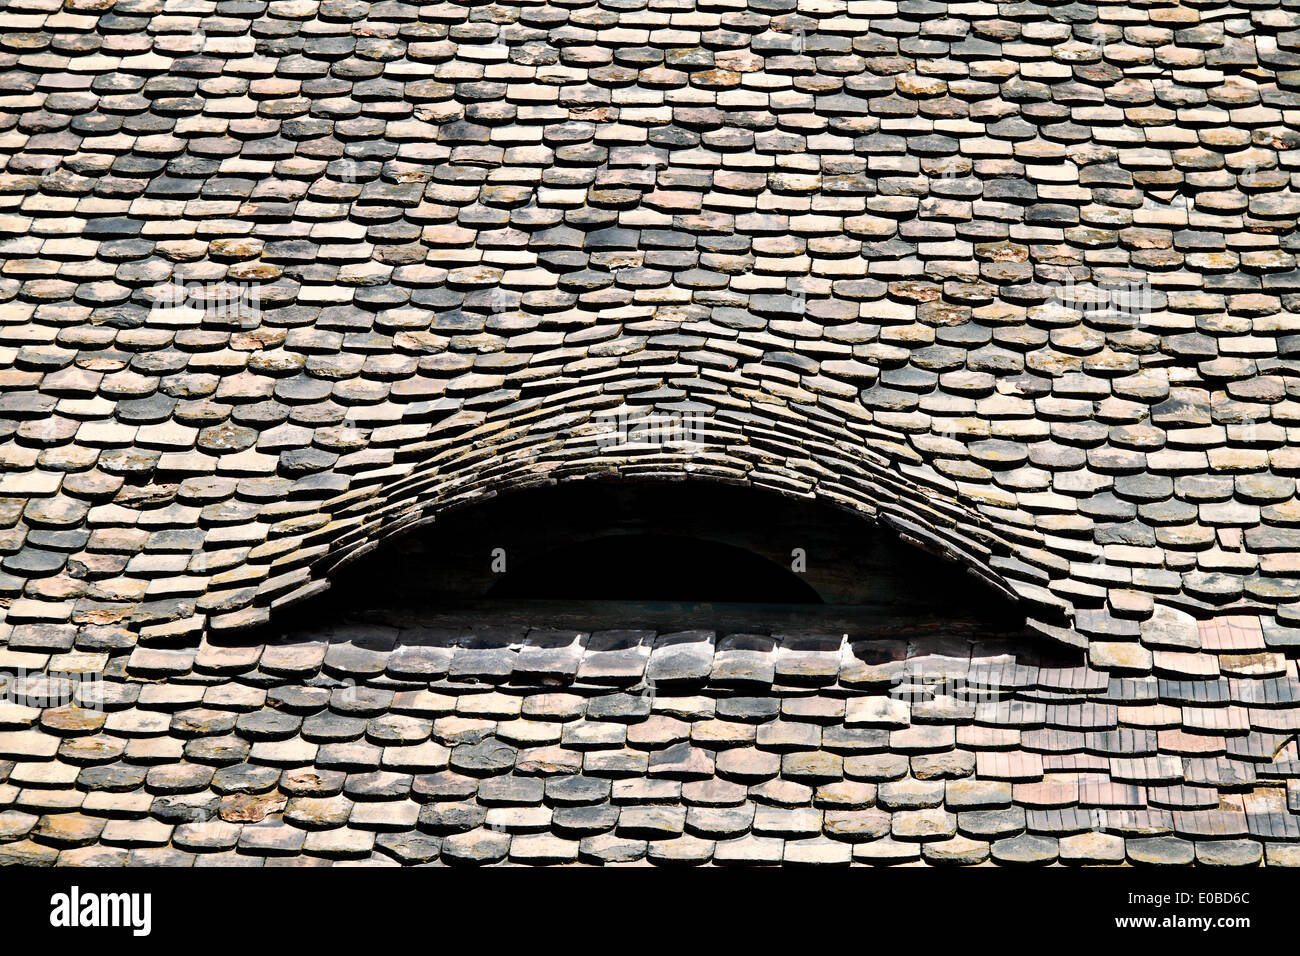 Roof shingles on an old house. Old roof with roofing tiles covered, Dachschindeln auf einem alten Haus. Altes Dach mit Dachziege Stock Photo